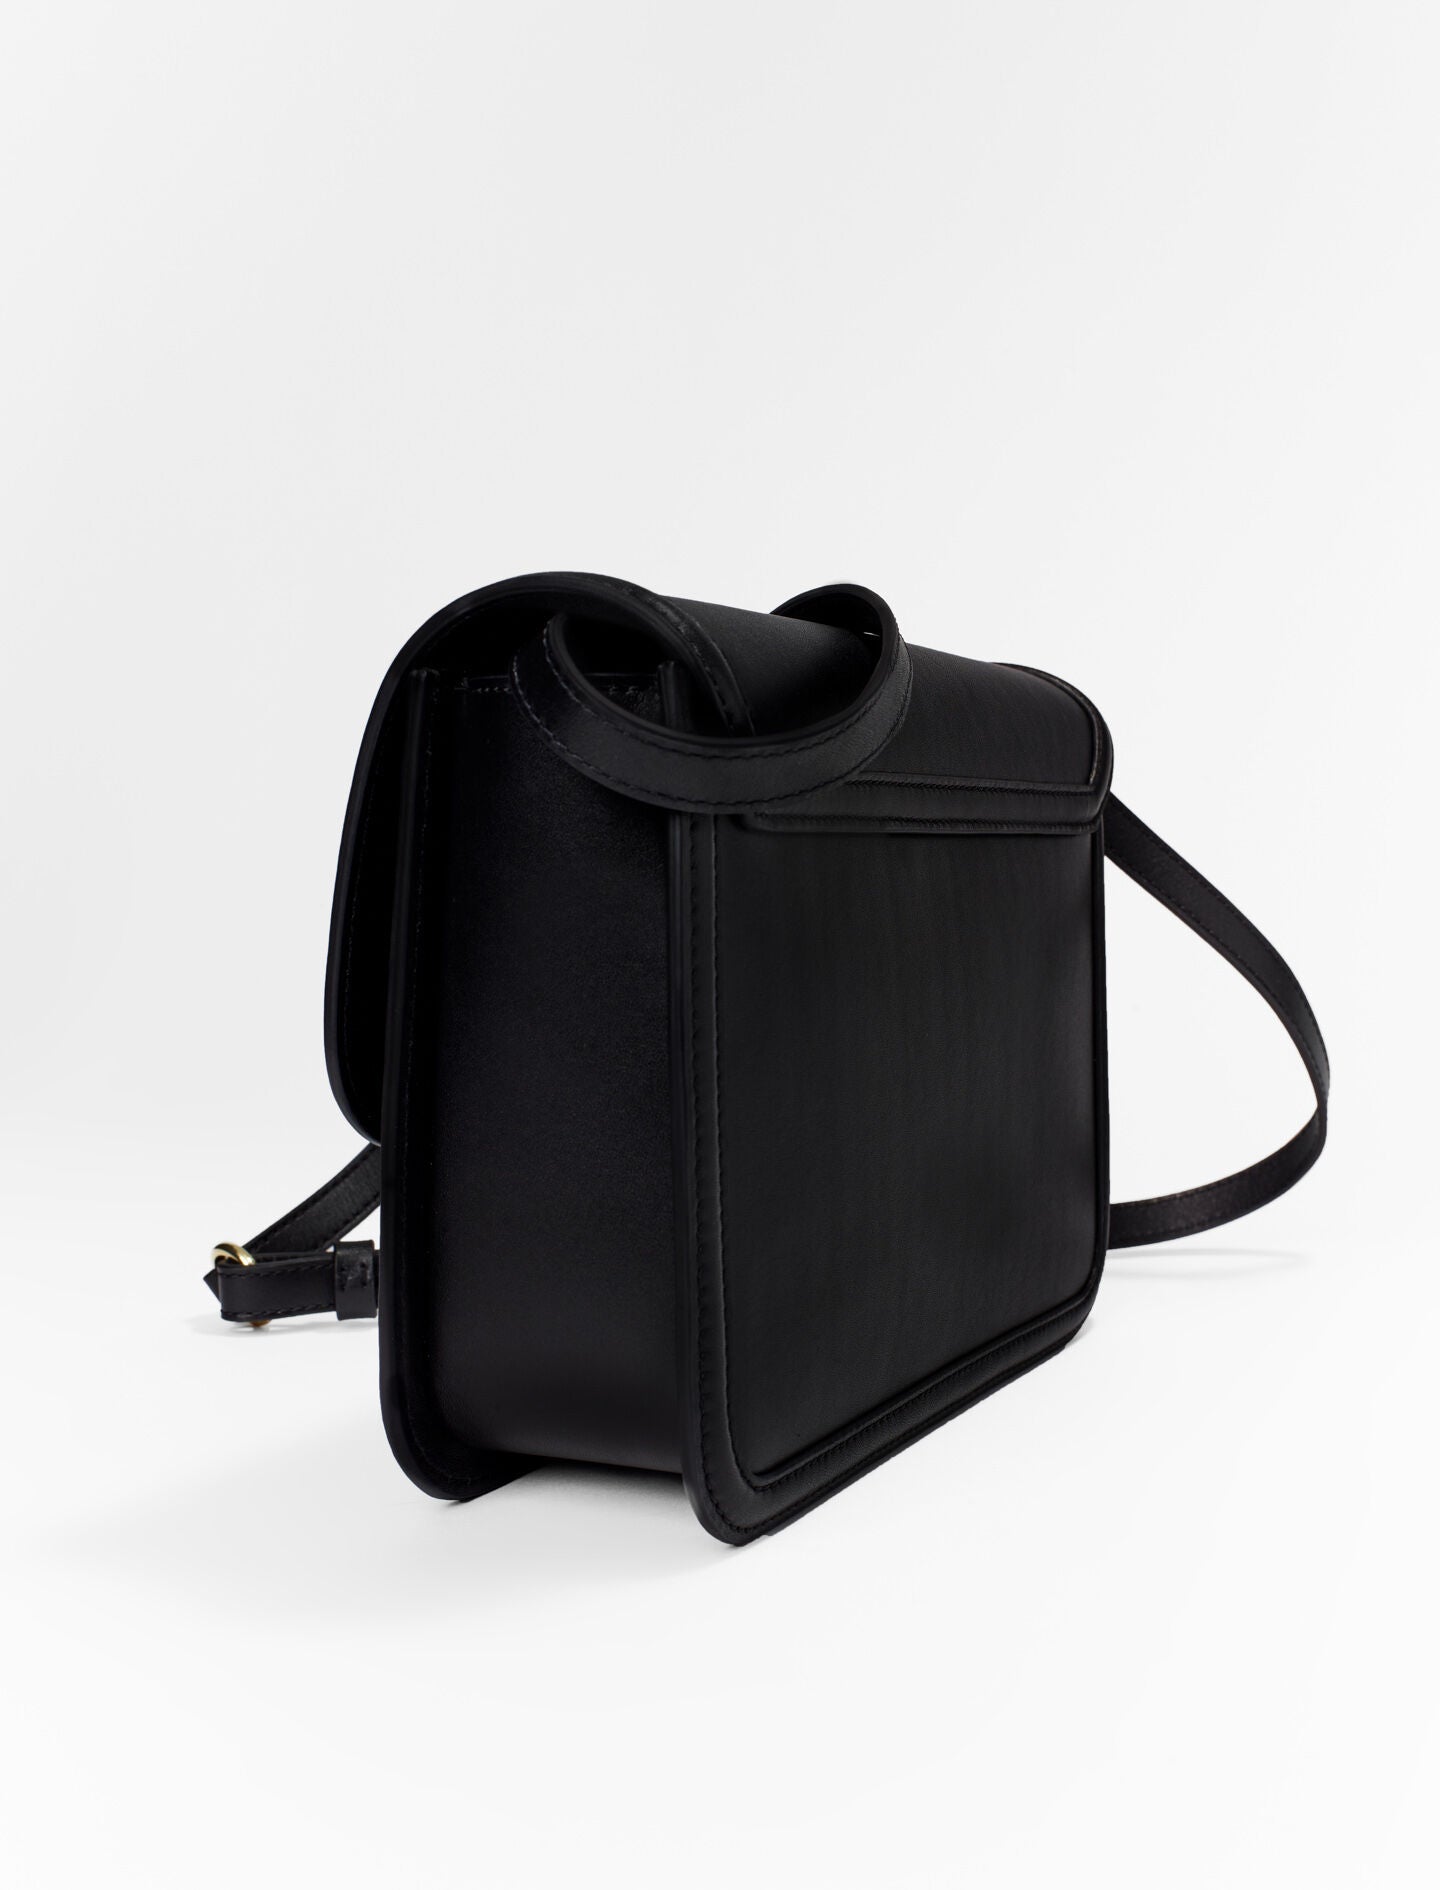 Black Leather bag with clover clasp